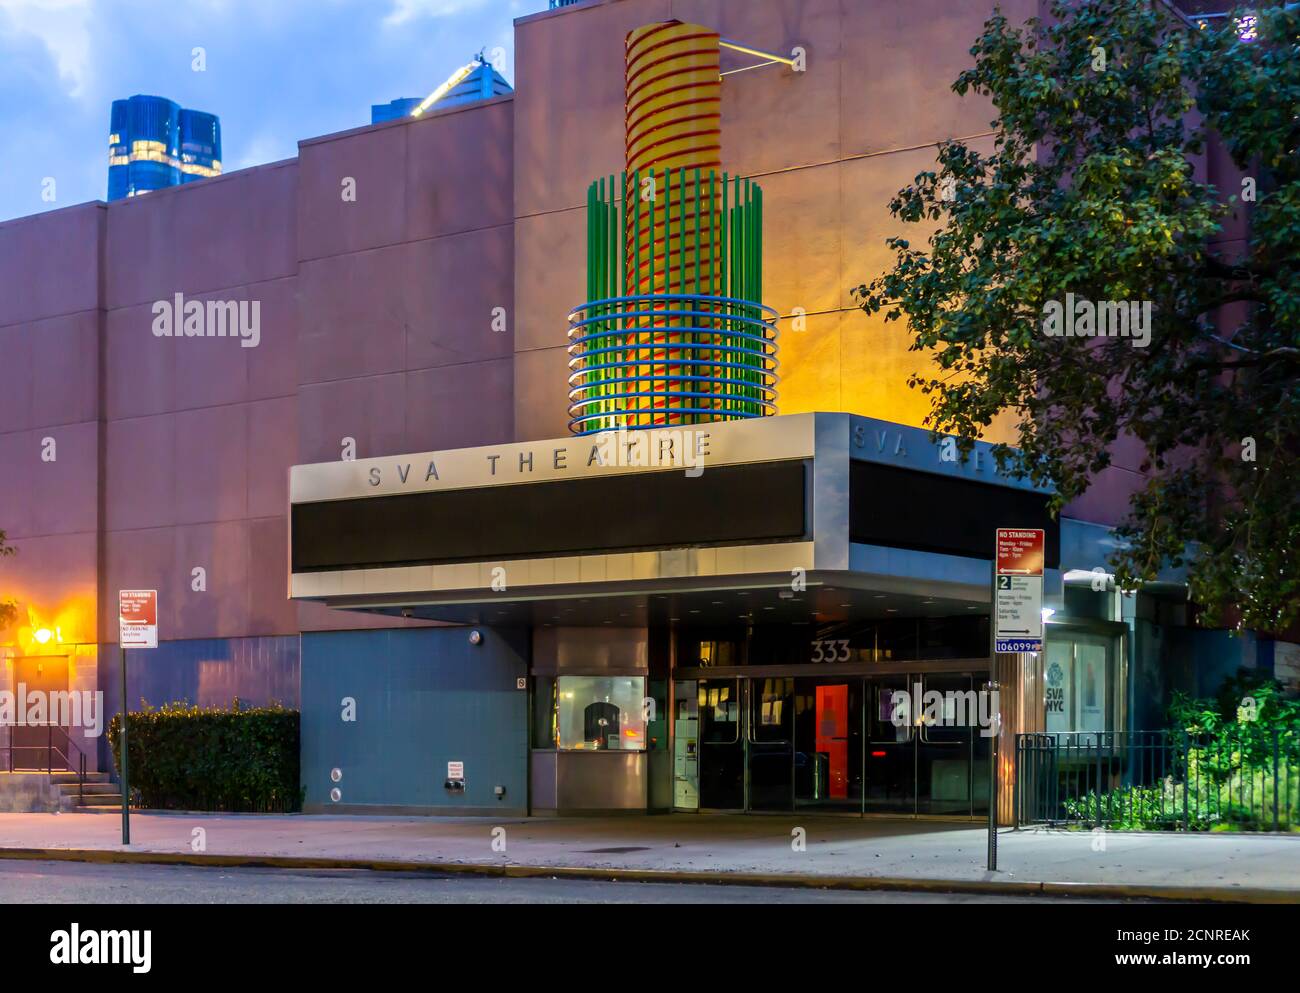 The SVA Theater in the Chelsea neighborhood of New York on Thursday, September 10, 2020.  The sculpture on the marquee was designed by the School of Visual Arts professor Milton Glaser. New York State has till not allowed theaters to reopen even with limited capacity. (© Richard B. Levine) Stock Photo